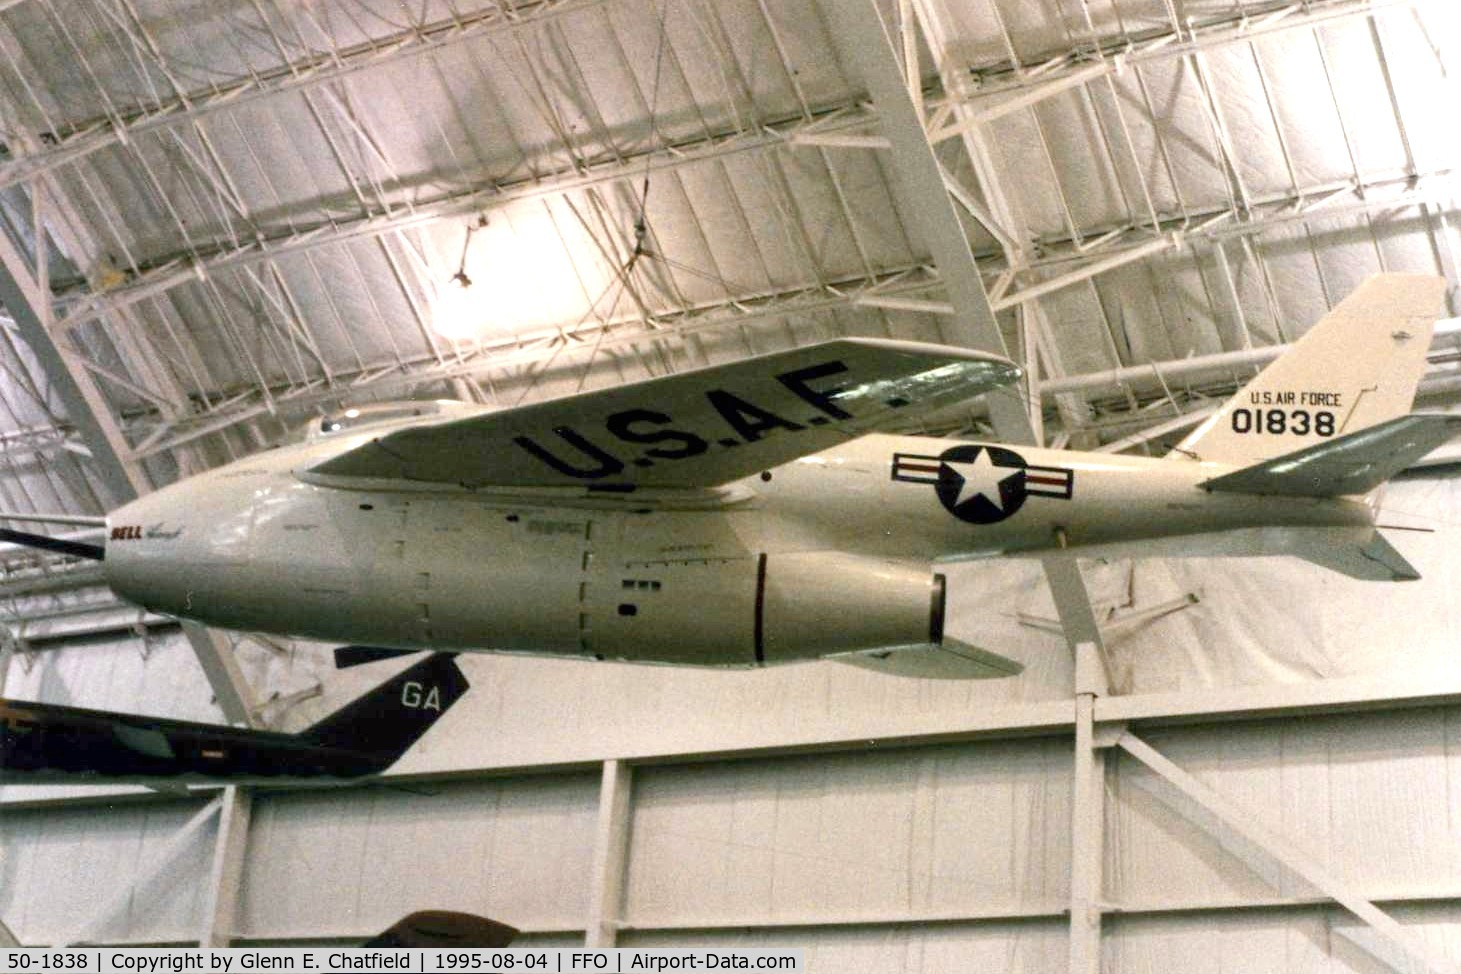 50-1838, 1950 Bell X-5 C/N Not found 50-1838, The Bell X-5 at the National Museum of the U.S. Air Force